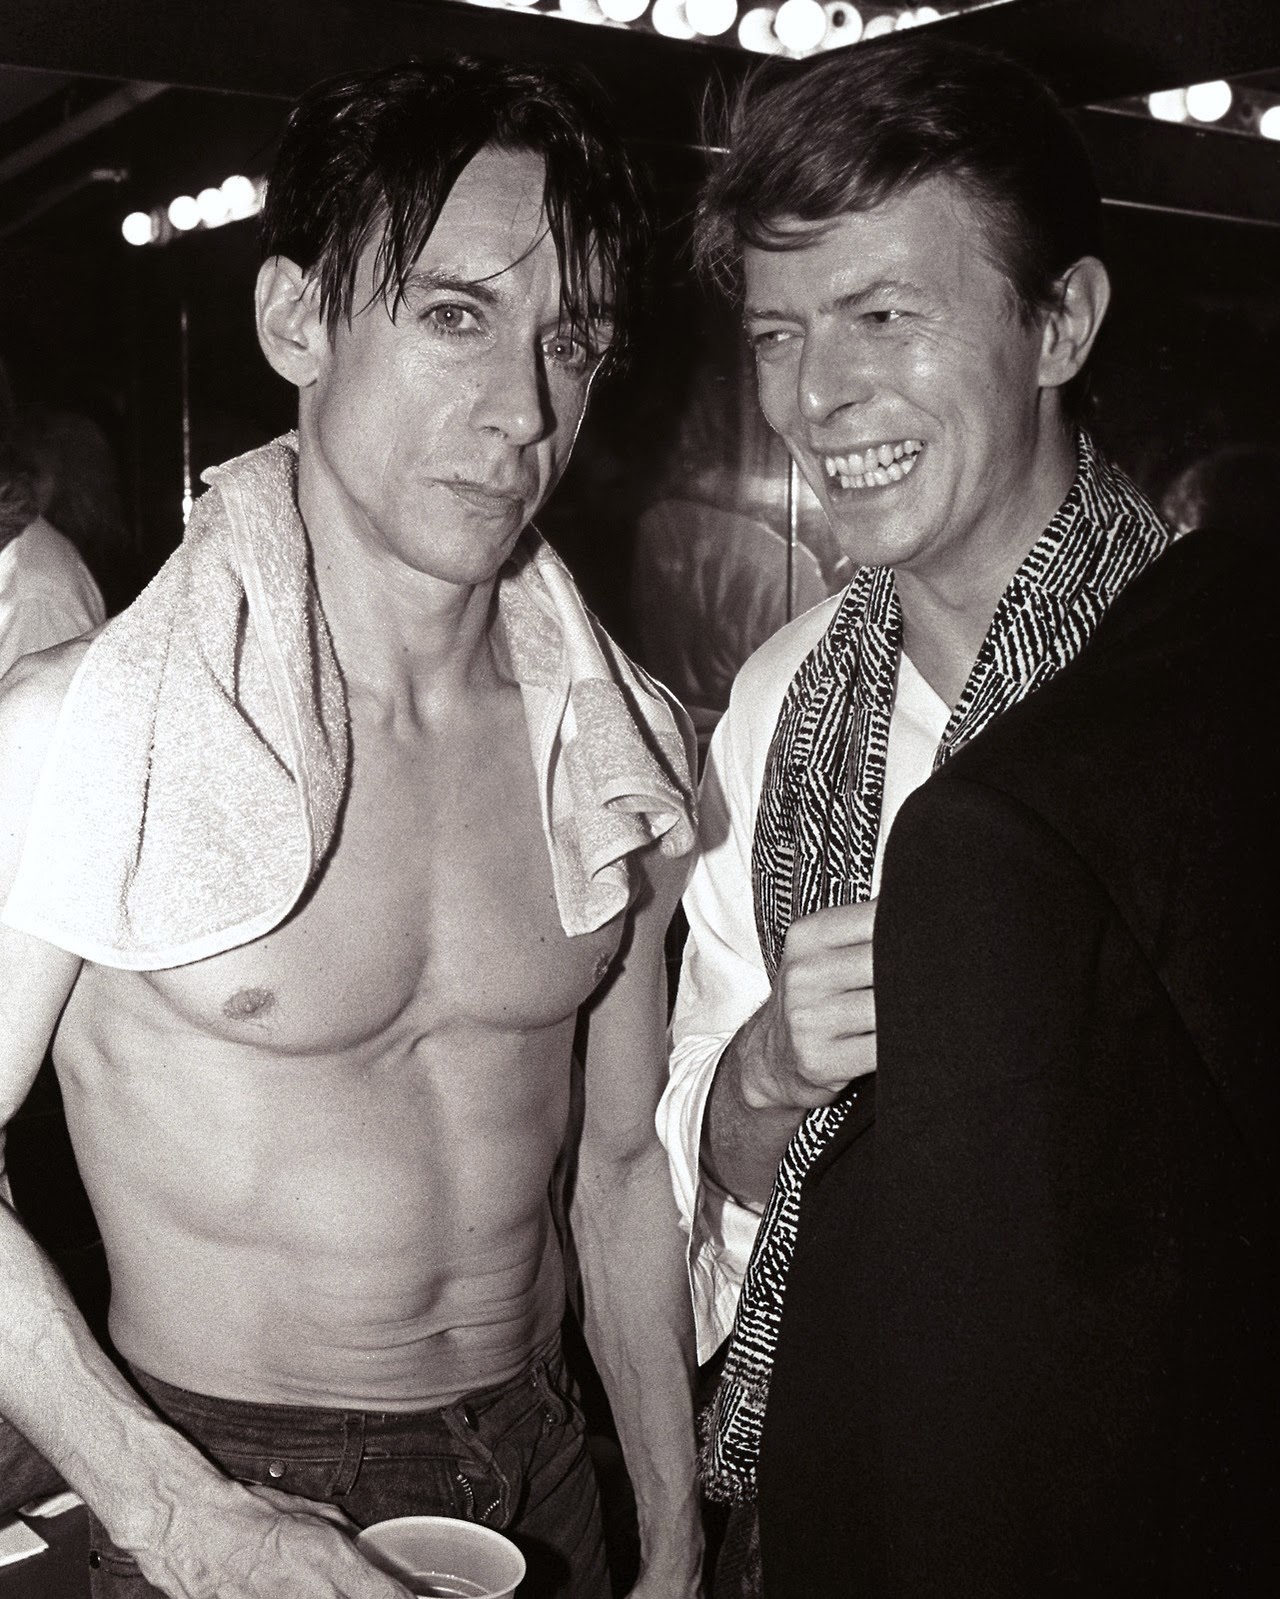 David-Bowie-and-Iggy-Pop-in-the-1970s-11.jpg